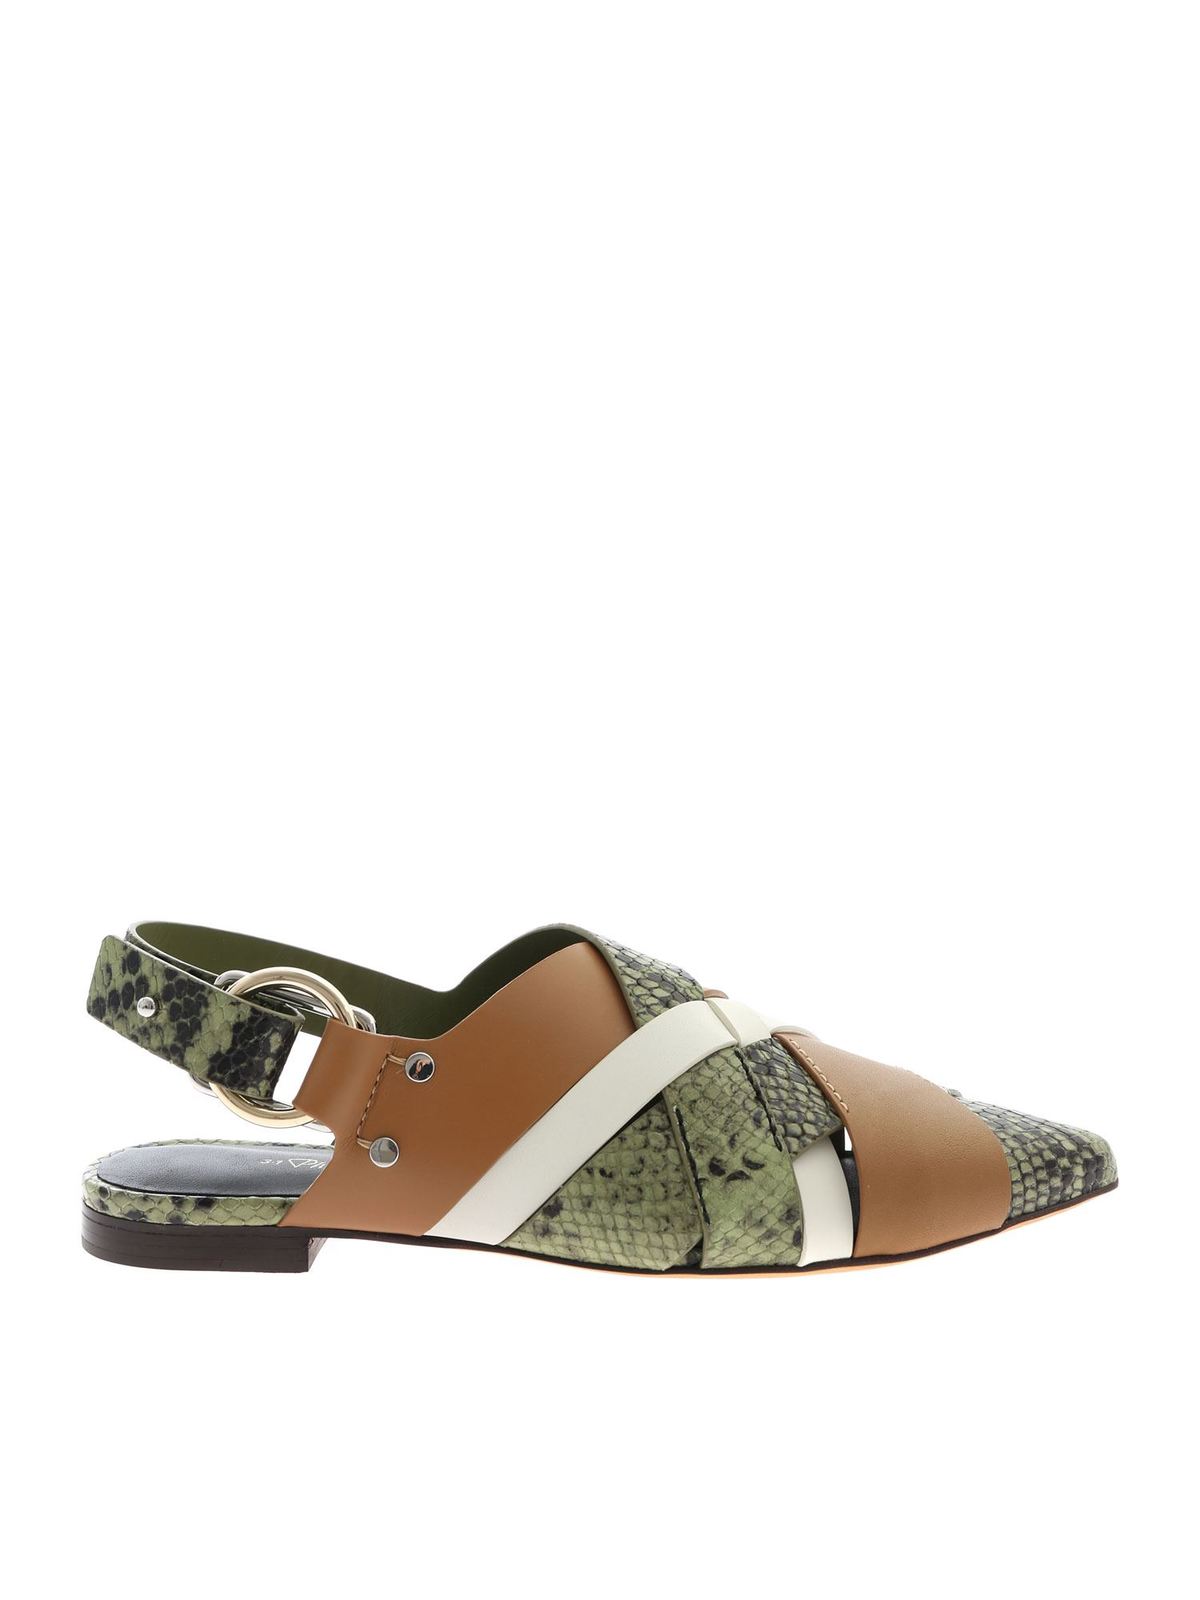 PHILLIP LIM MULES DEANNA IN GREEN AND BROWN